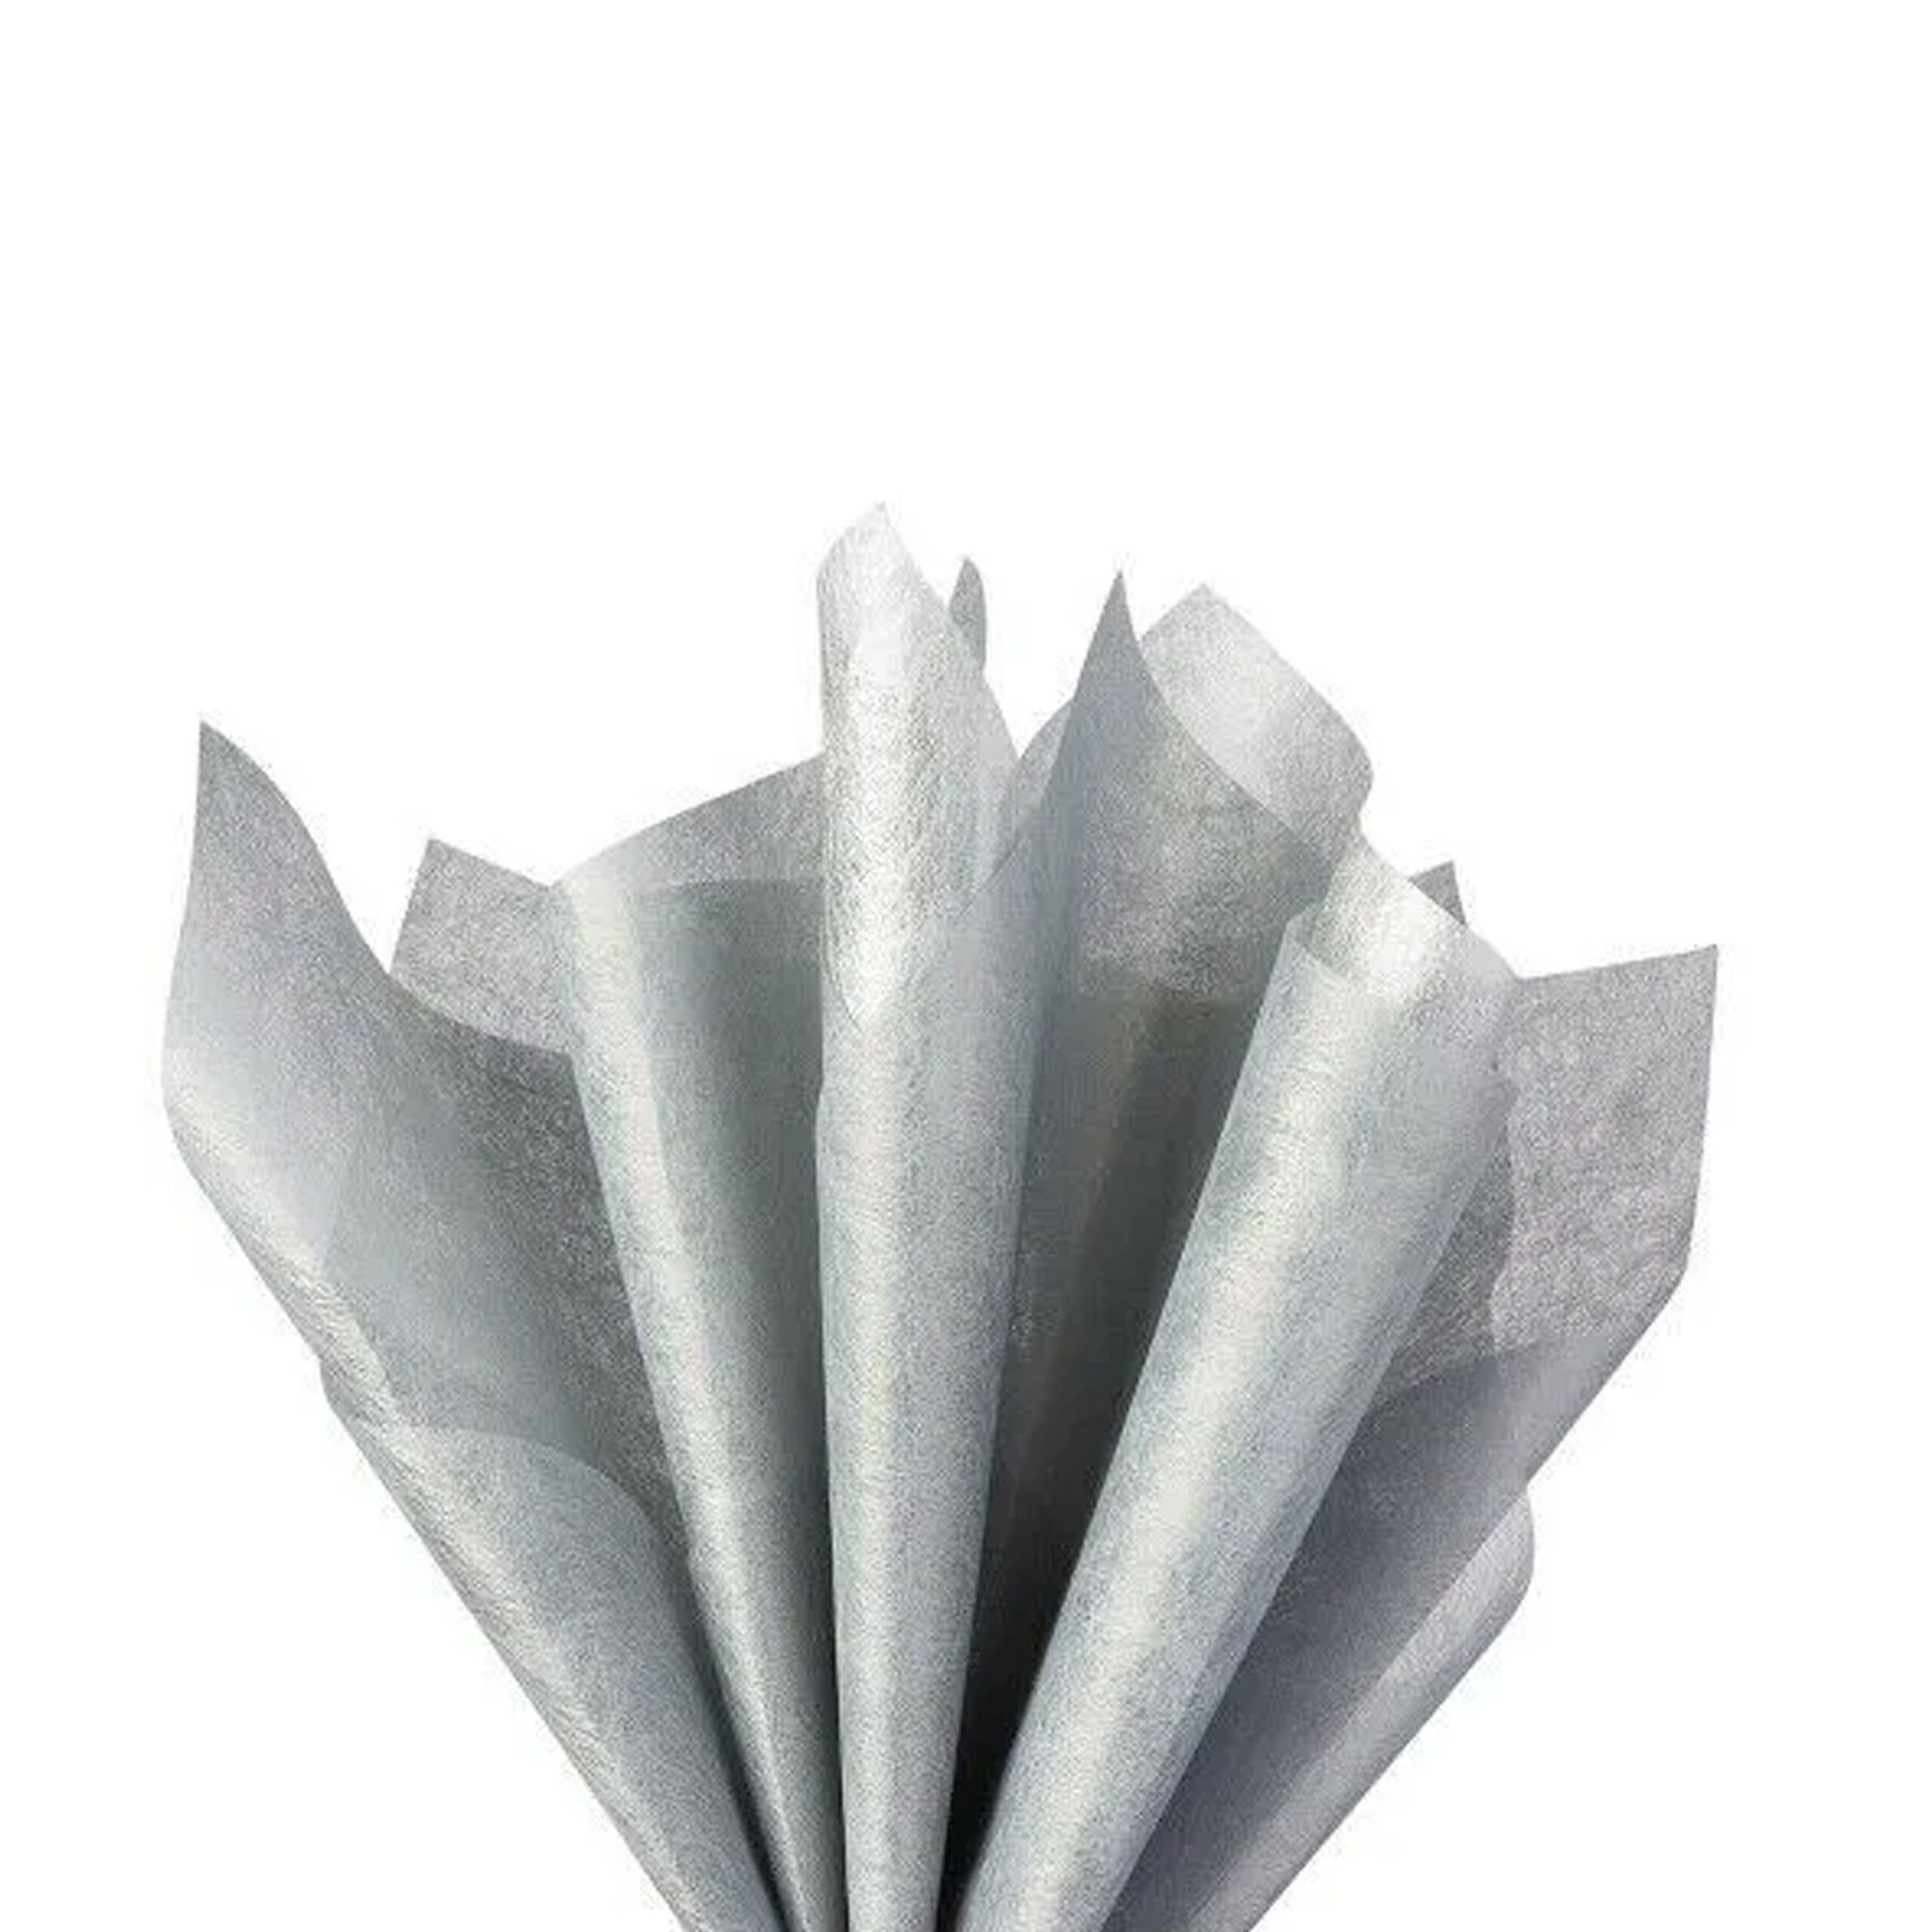 TISSUE PAPER
SILVER 10 SHEETS
50x66cm